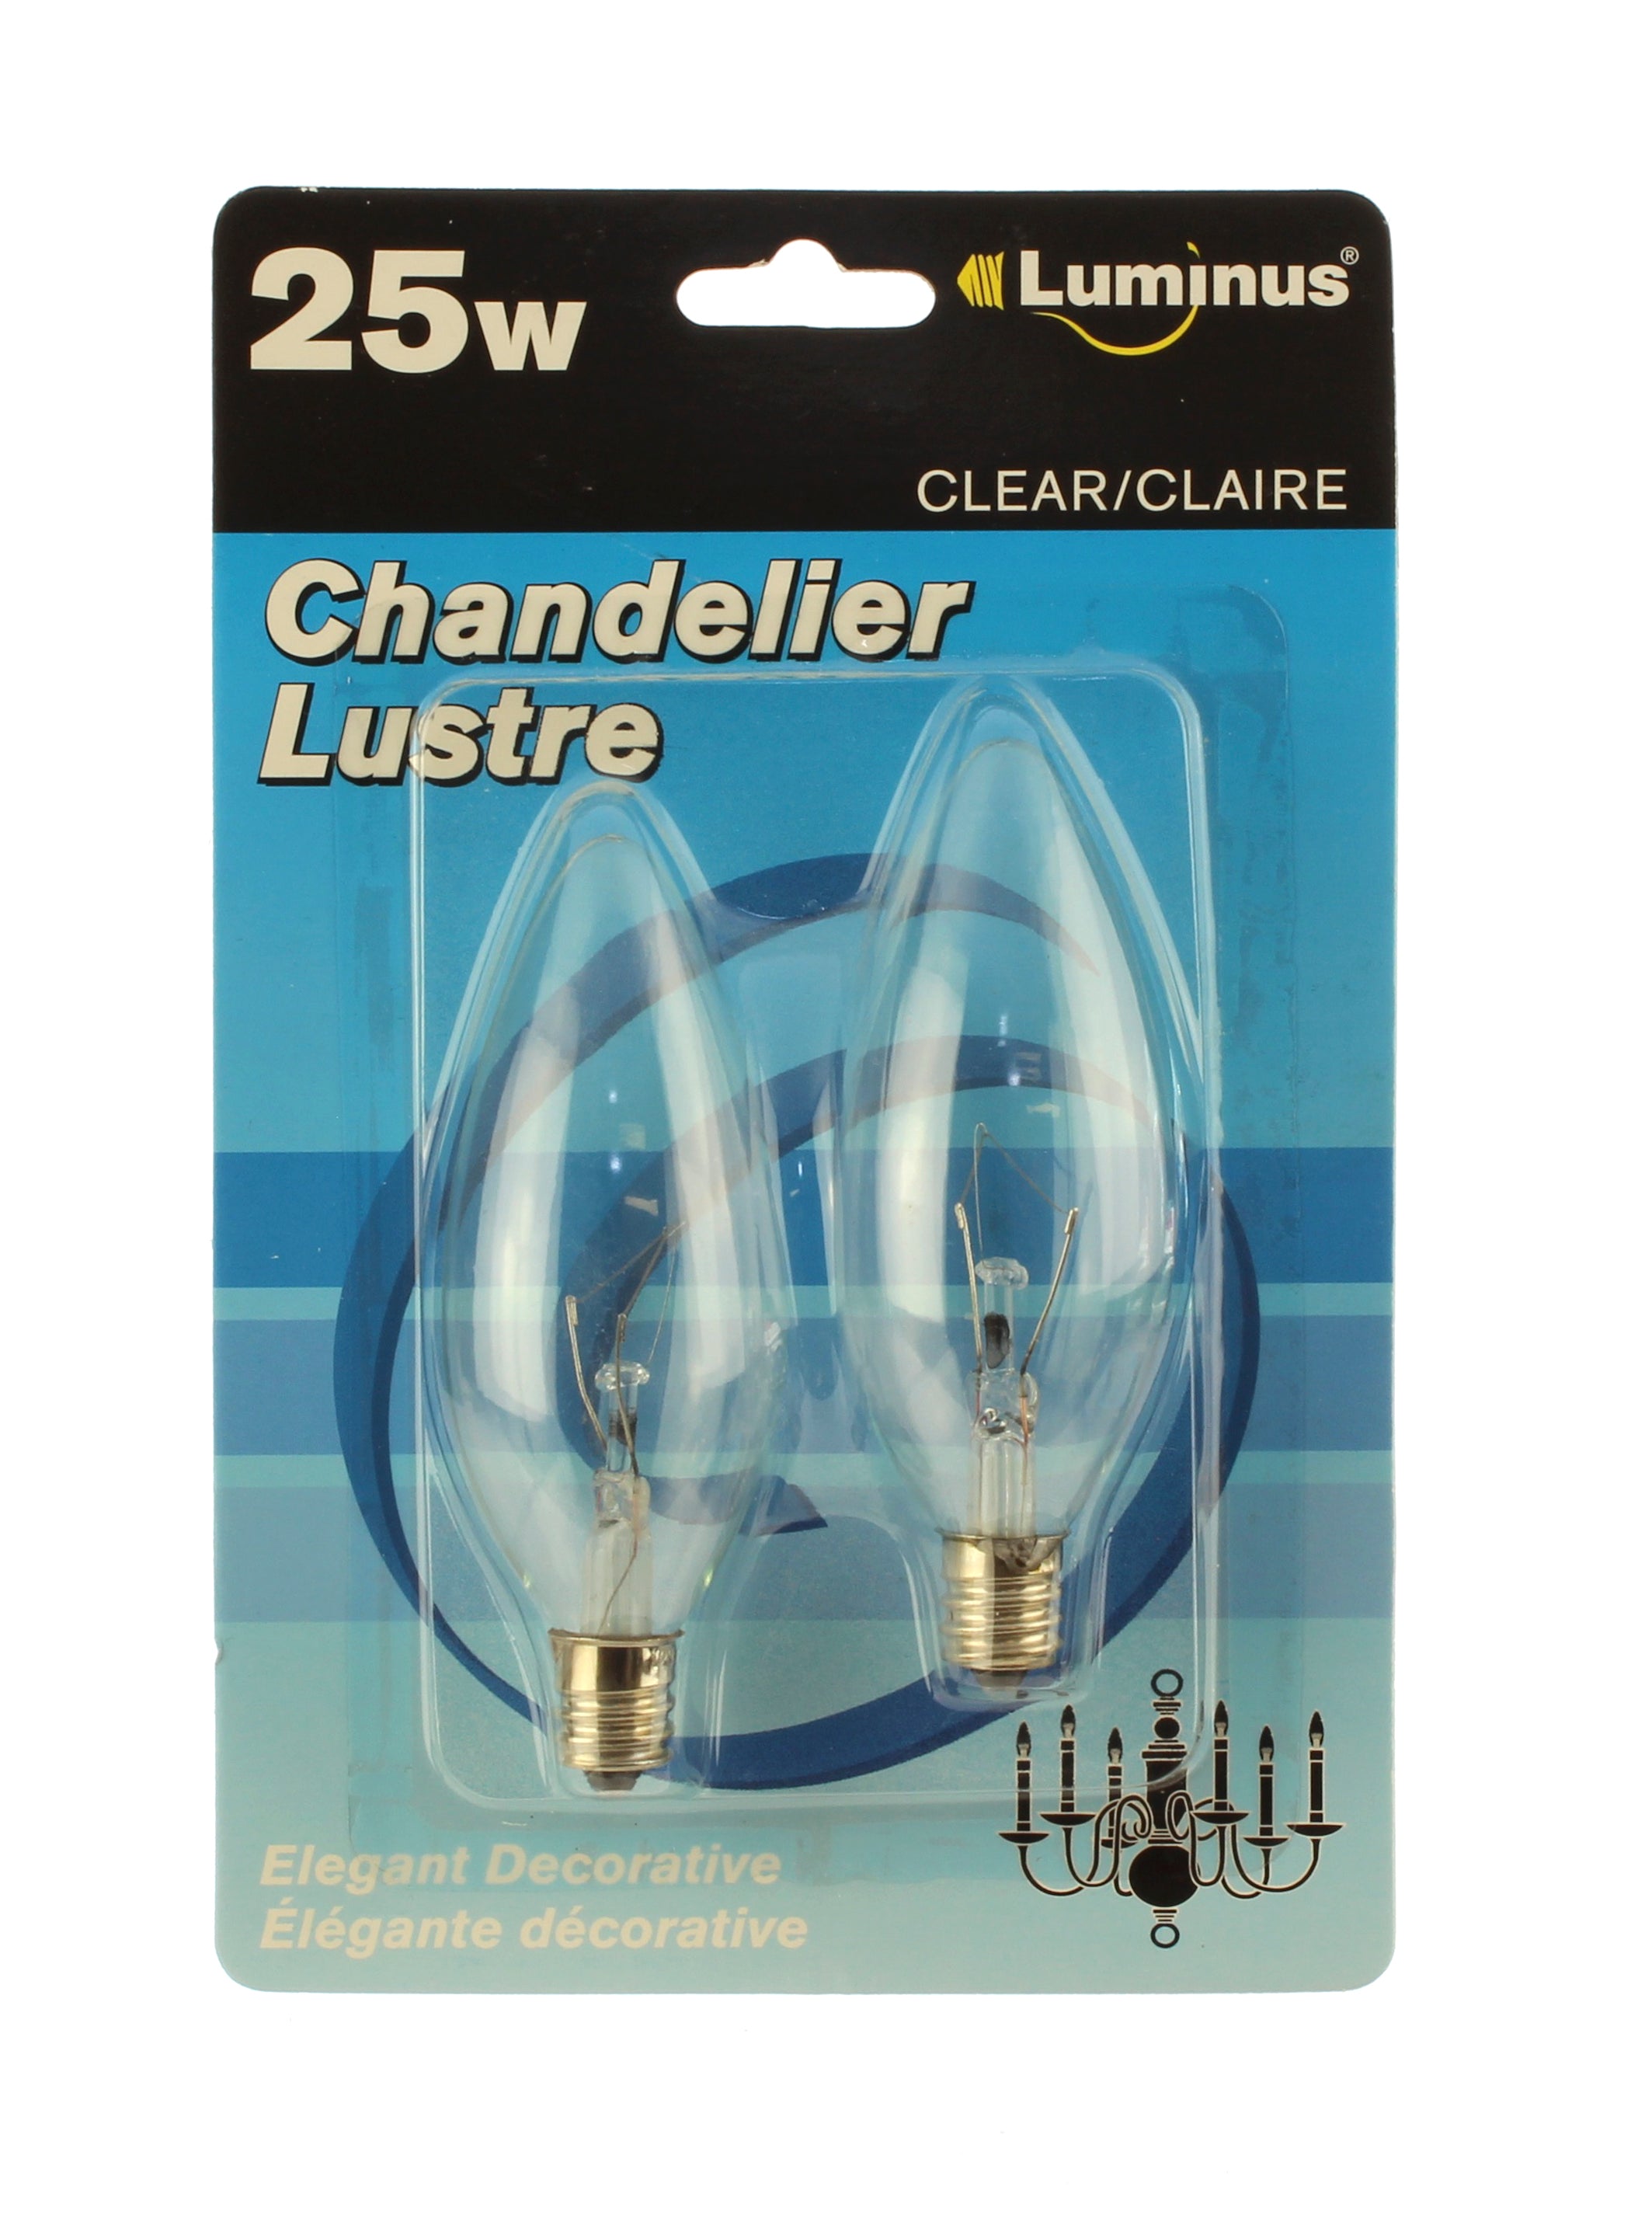 Luminus 25W/Ctc/120V/1500H/Clear Chandelier 2/Pack